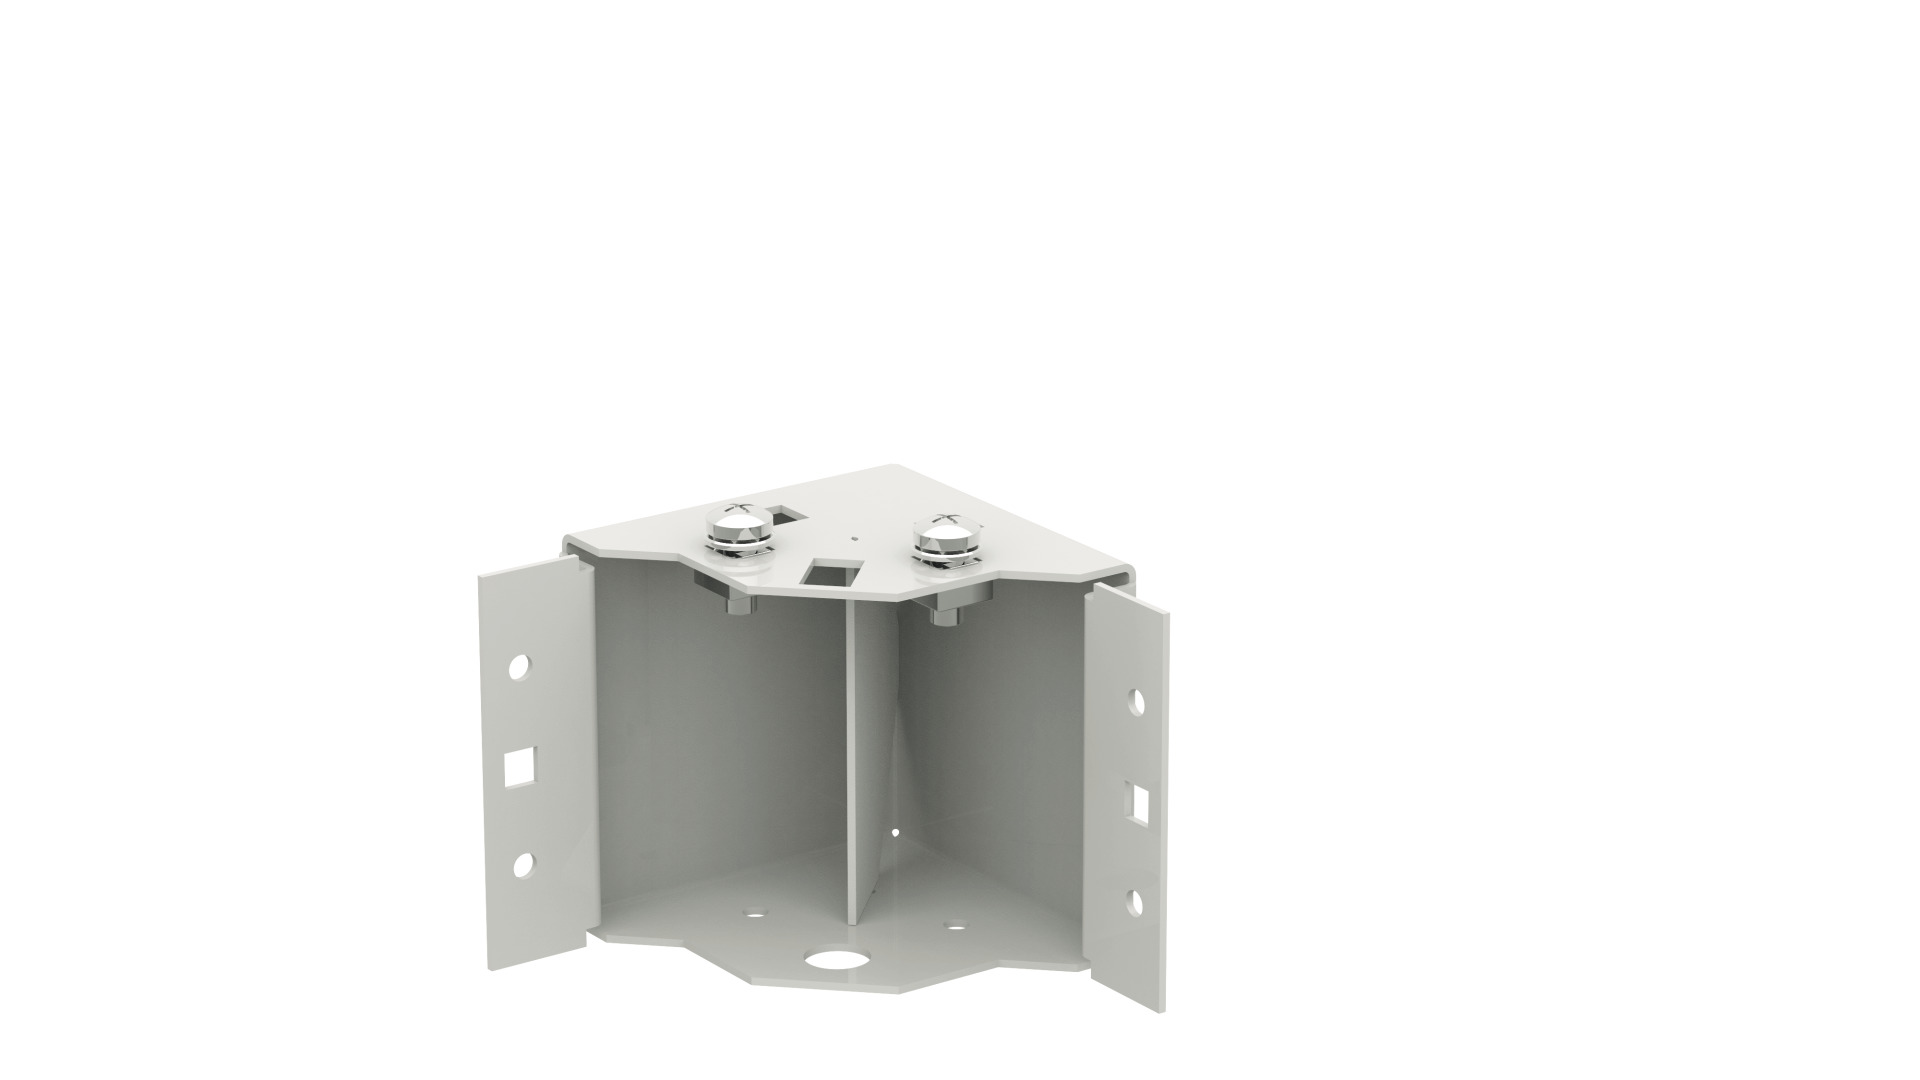 4 Plinth Corners for PRO, Fixed, H=100 mm, RAL7035